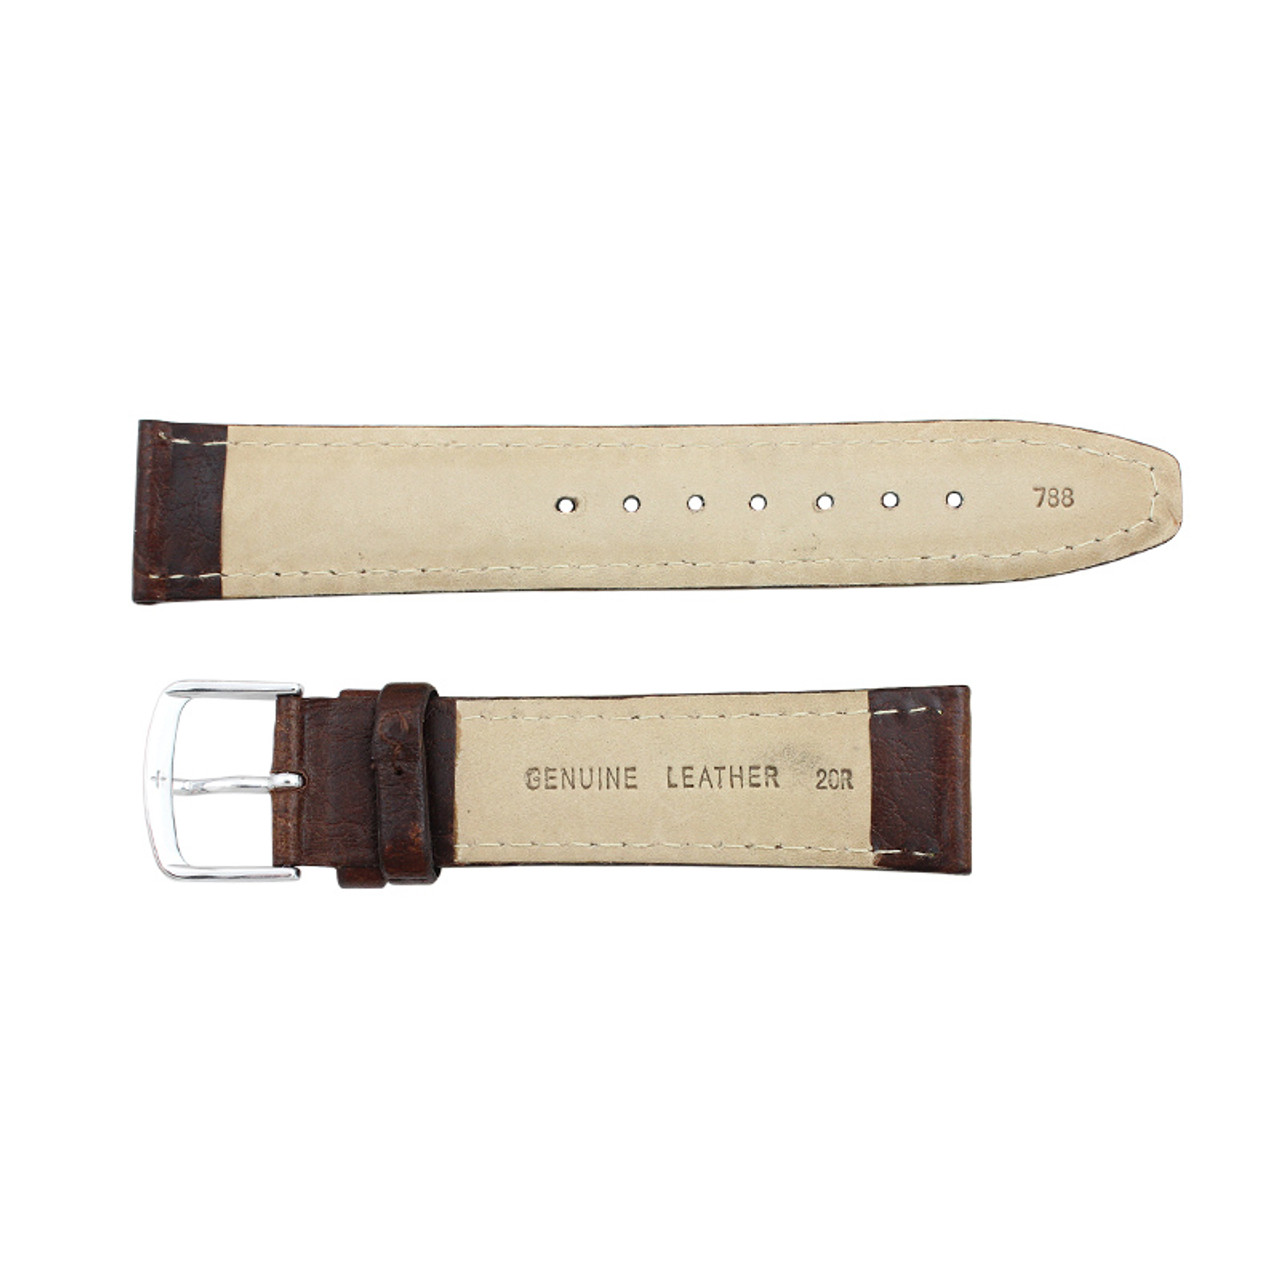 New 16 Genuine Leather Strap | Paddle